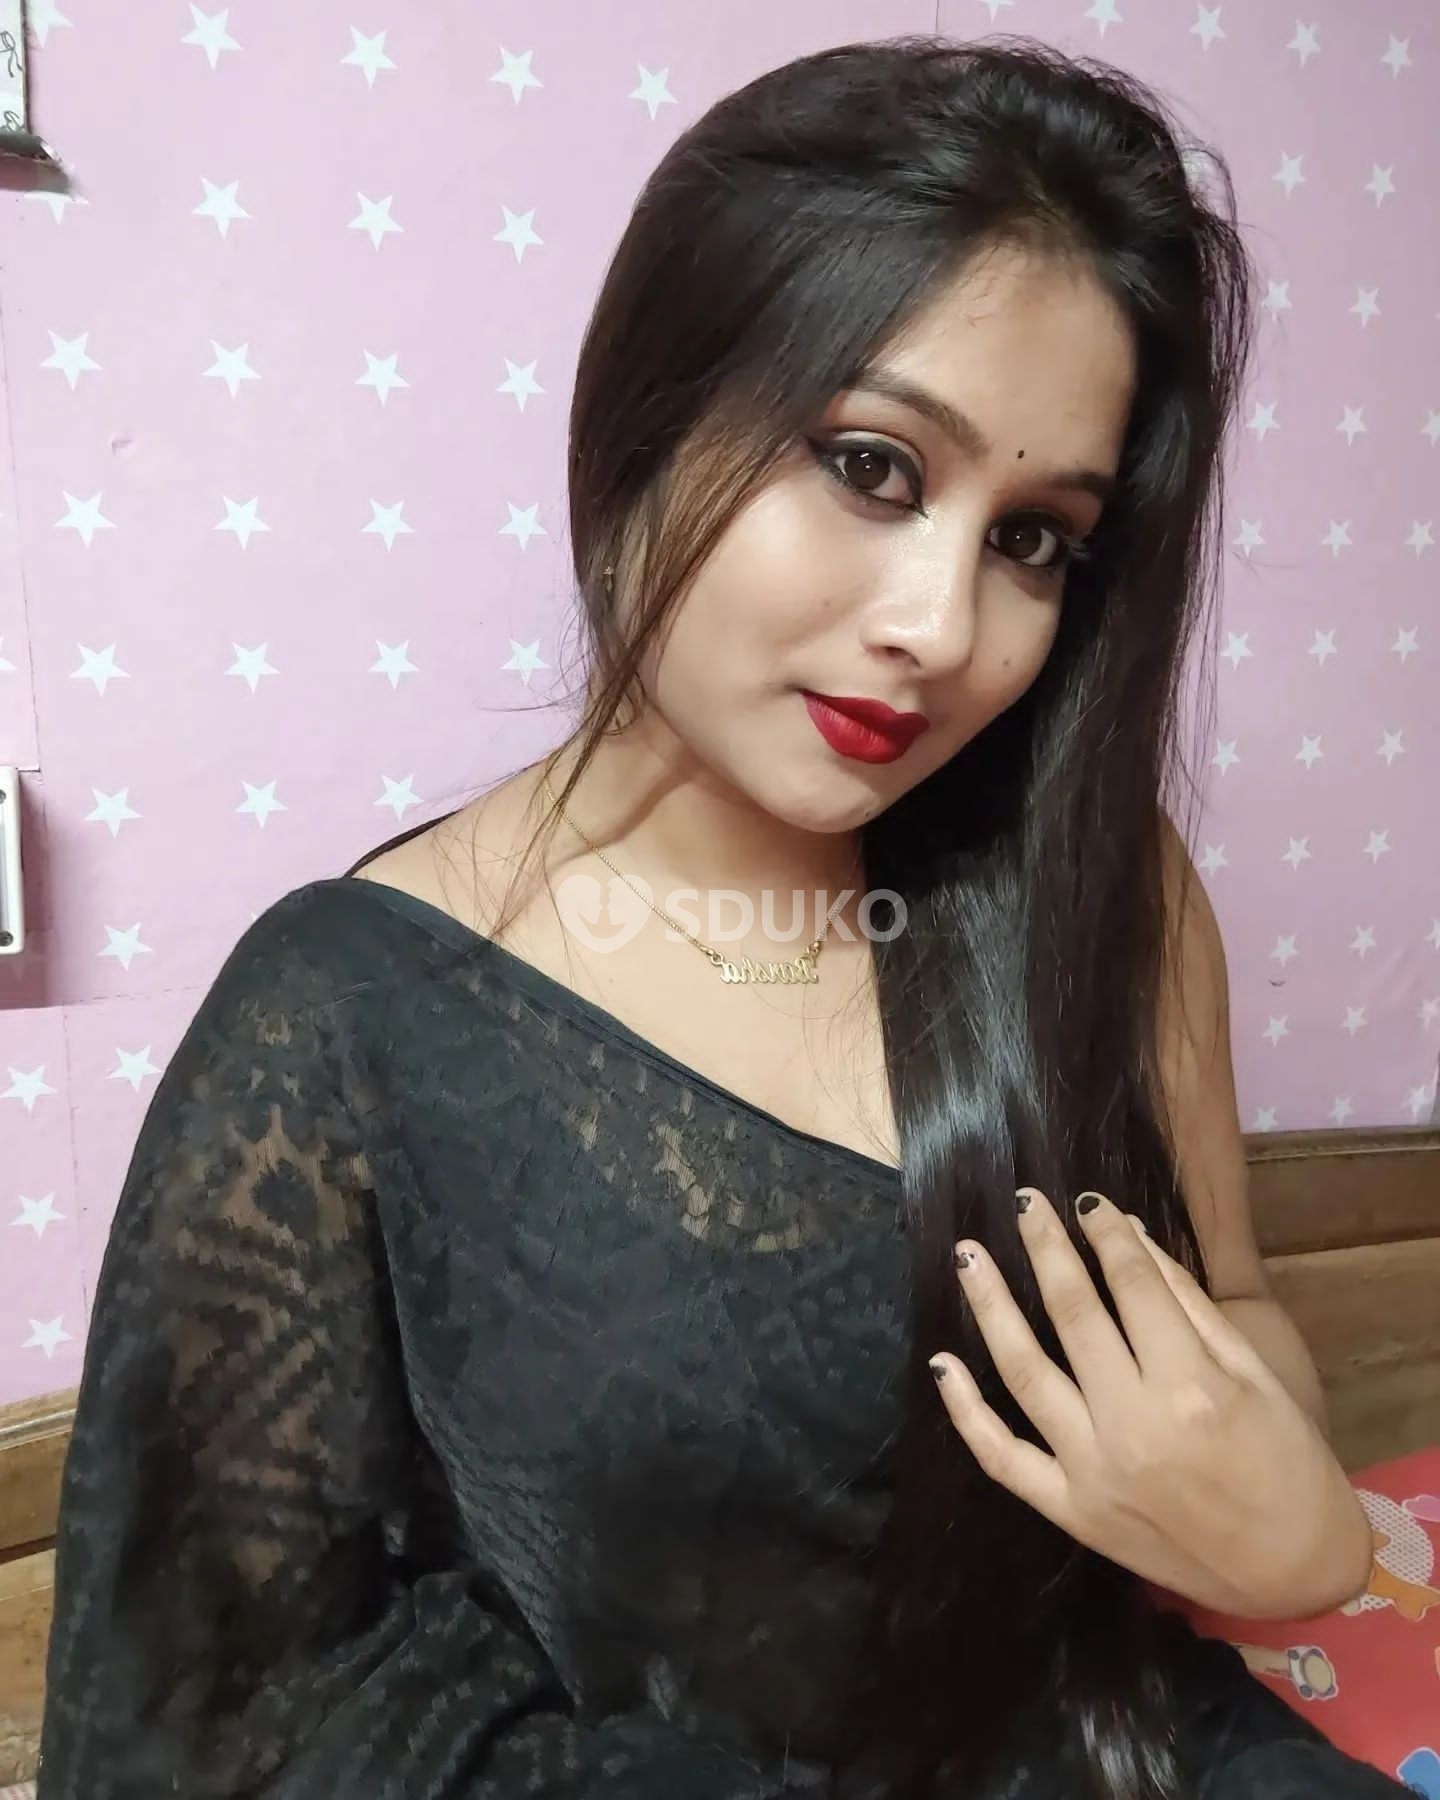 Kolhapur//..🆑 TODAY LOW PRICE 100% SAFE AND SECURE GENUINE CALL GIRL AFFORDABLE PRICE CALL NOW